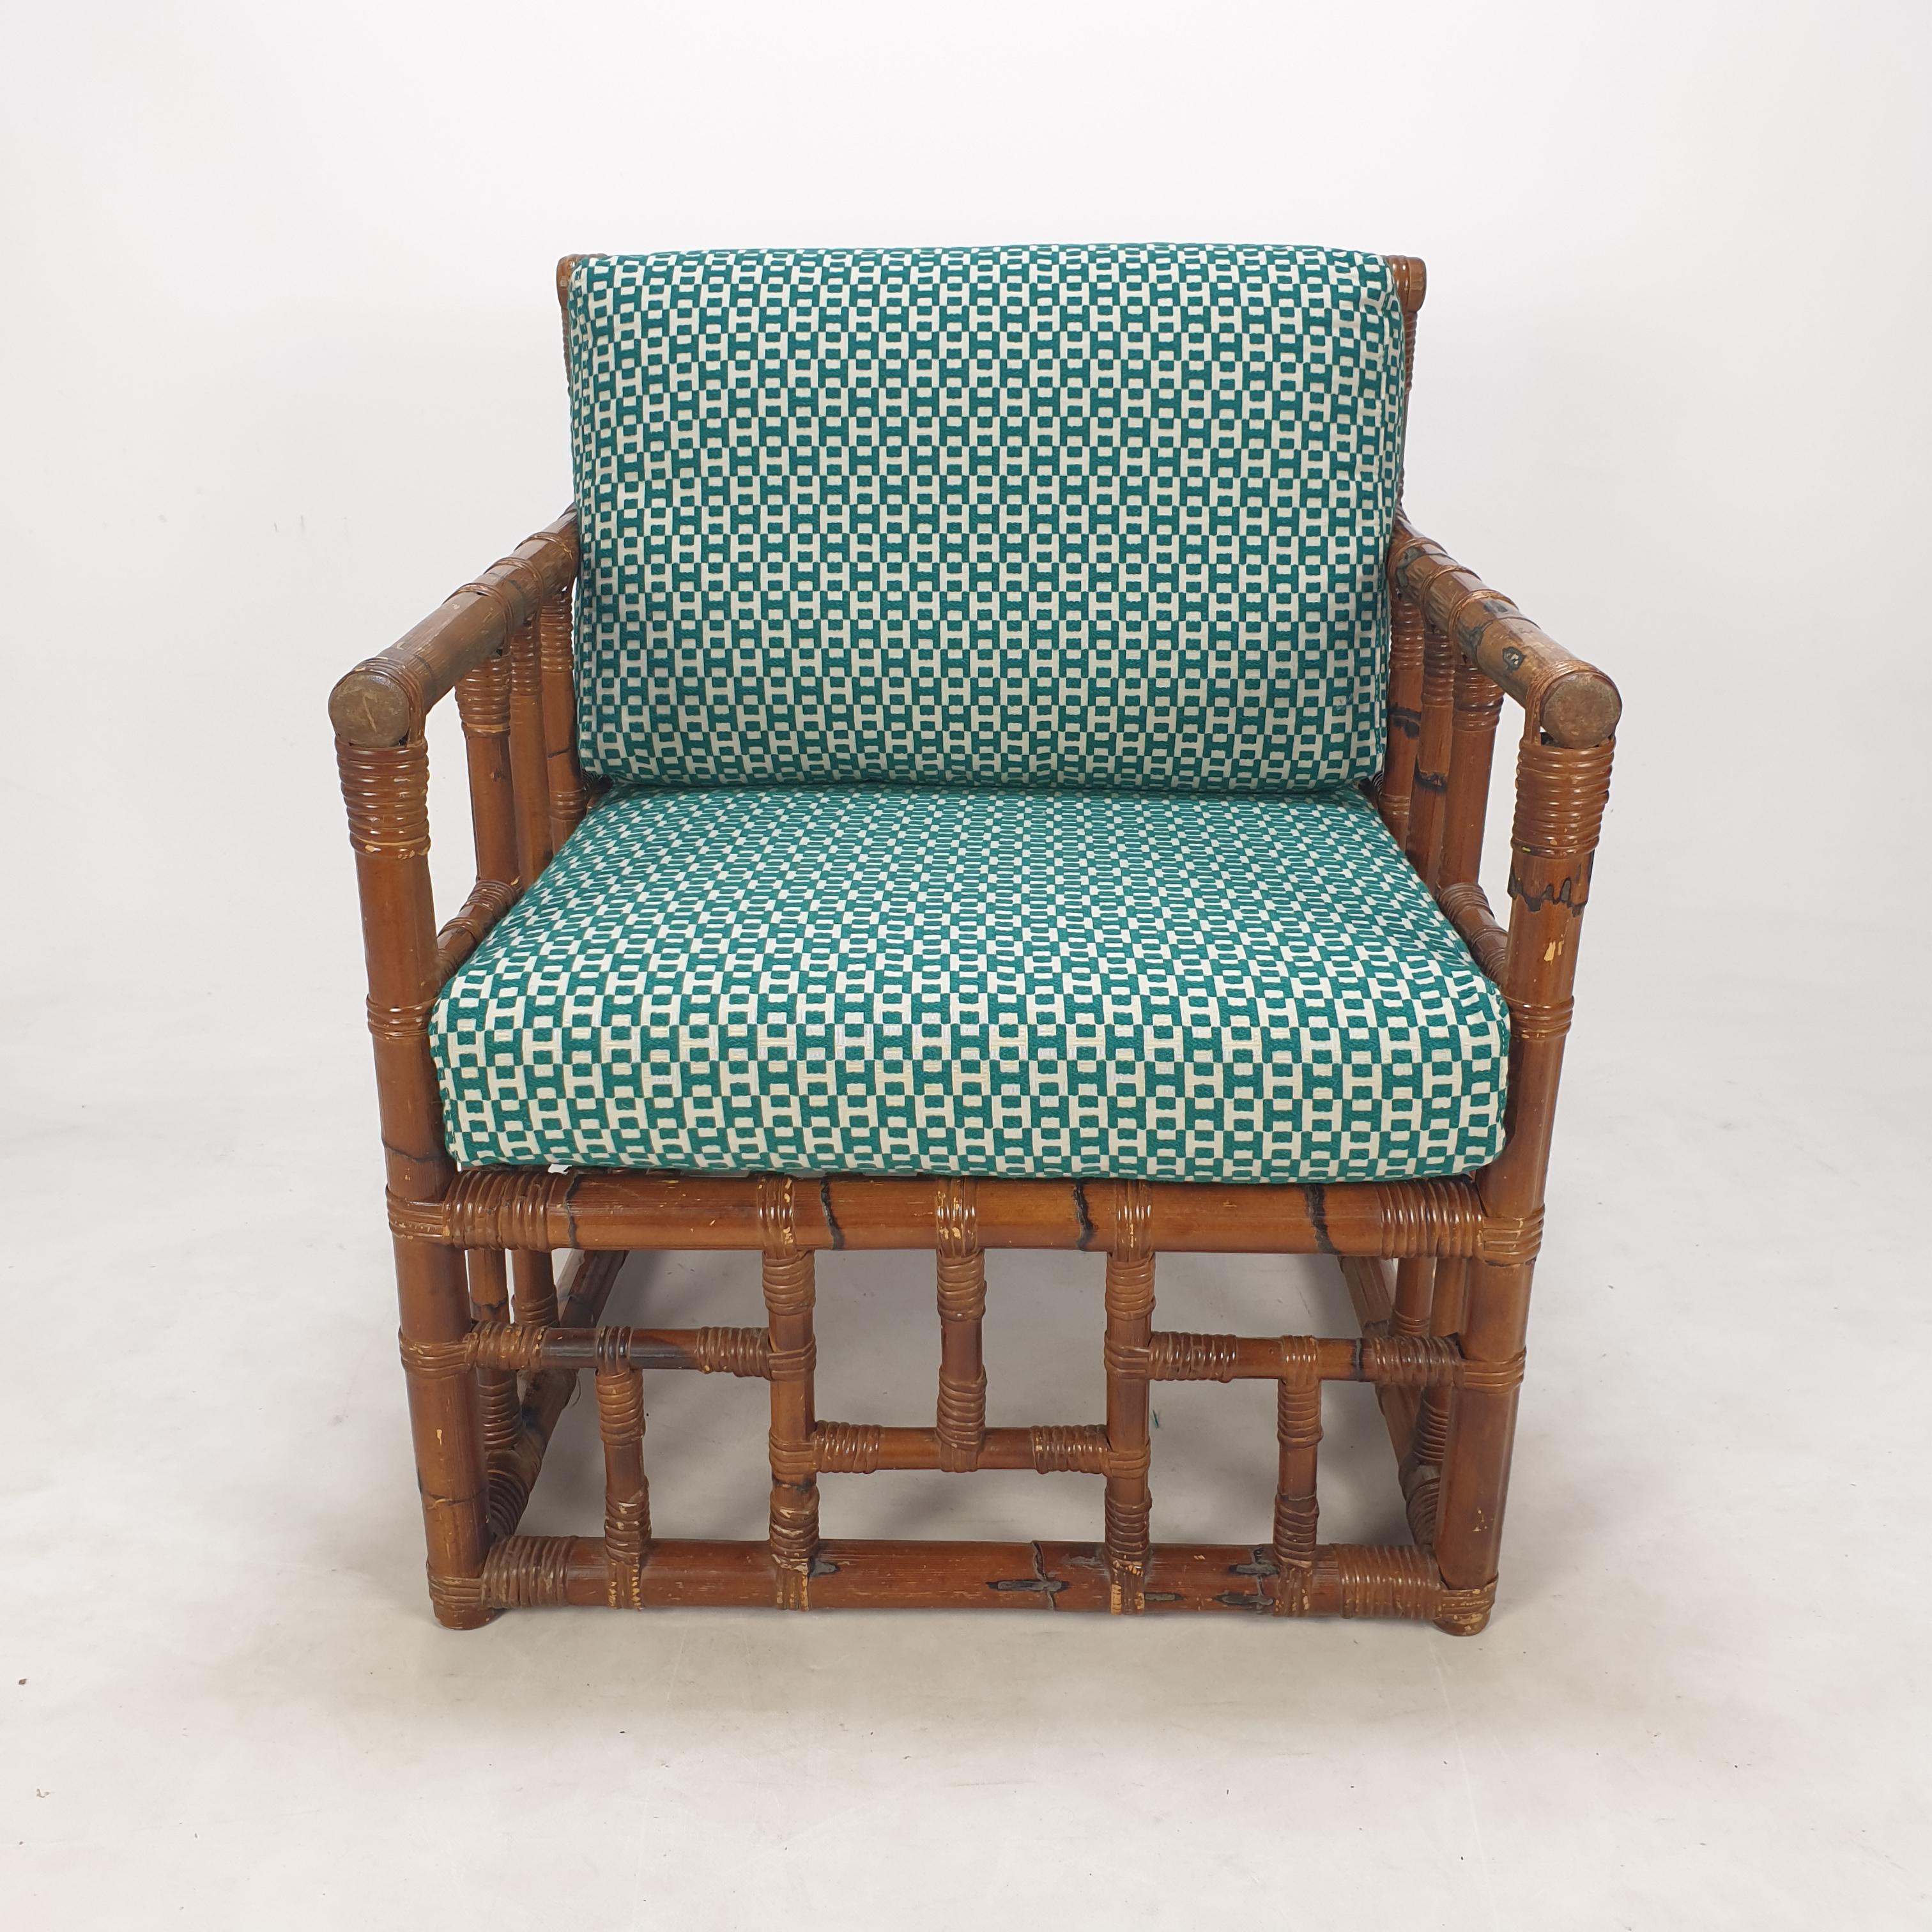 Pair of Italian Bamboo Lounge Chairs with Hermès Upholstery, 1970's For Sale 9